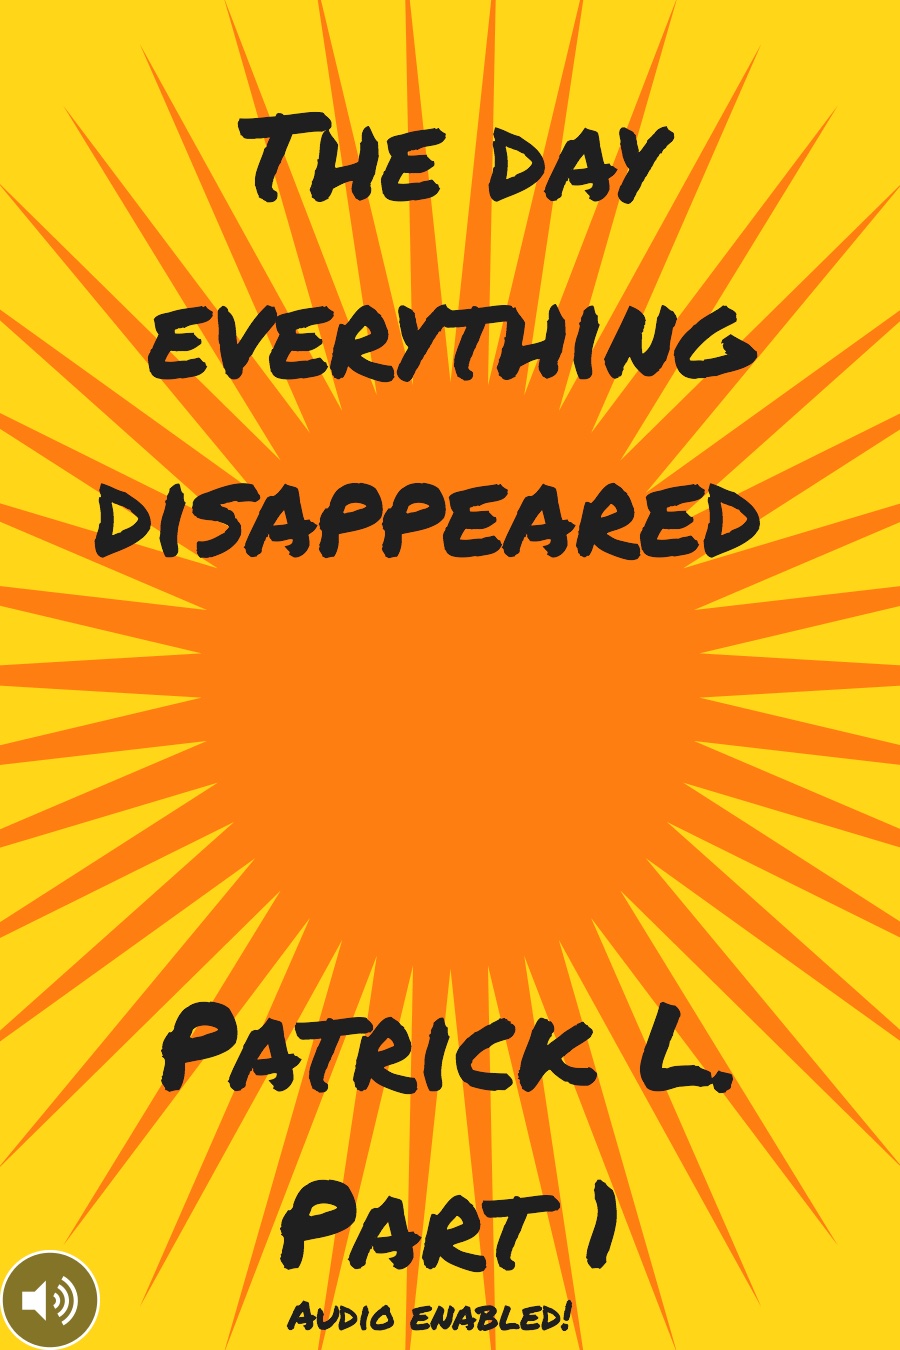 The Day Everything Disappeared Part 1 by Patrick L